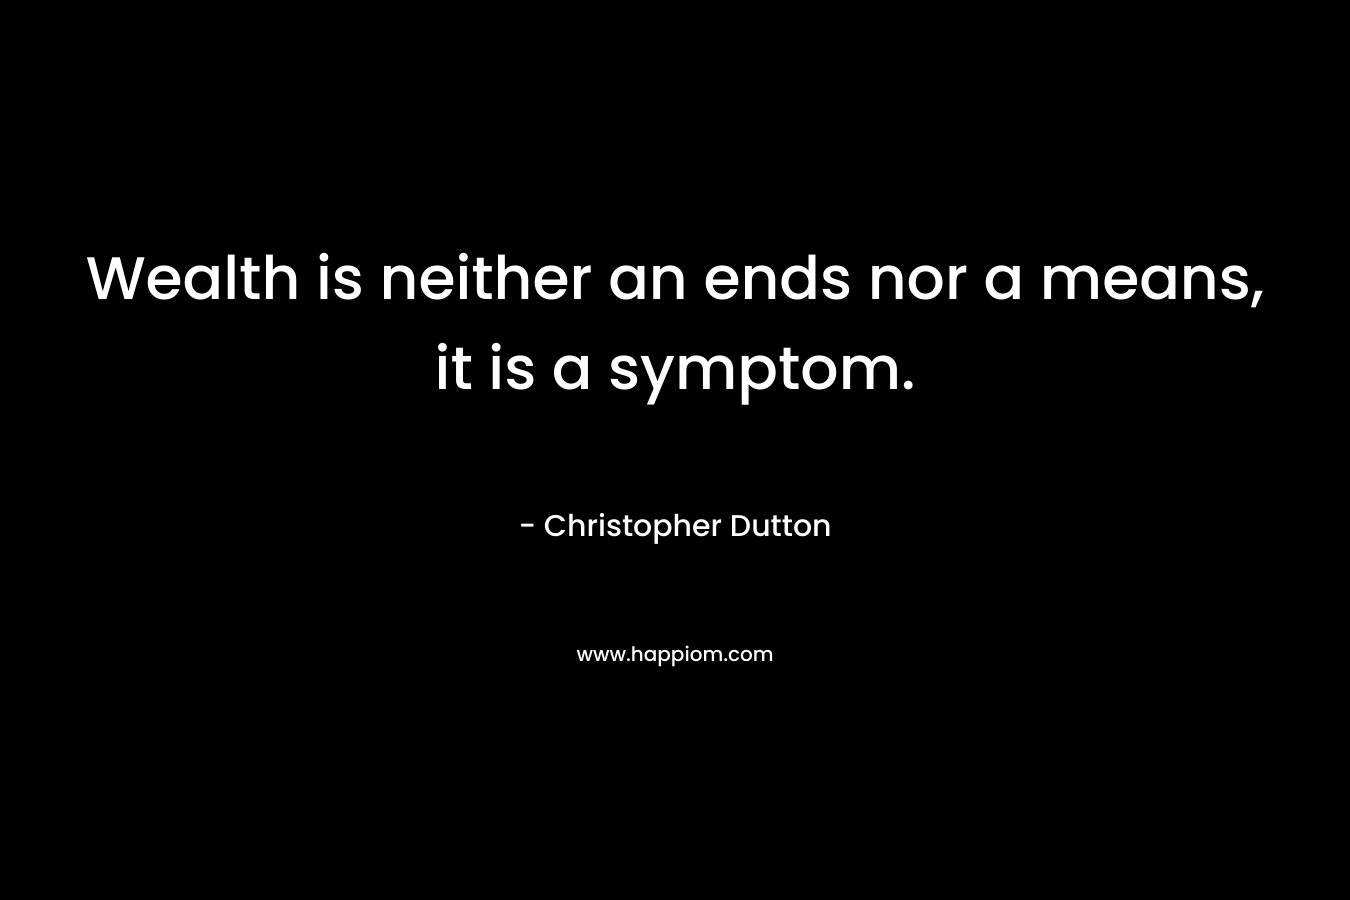 Wealth is neither an ends nor a means, it is a symptom.